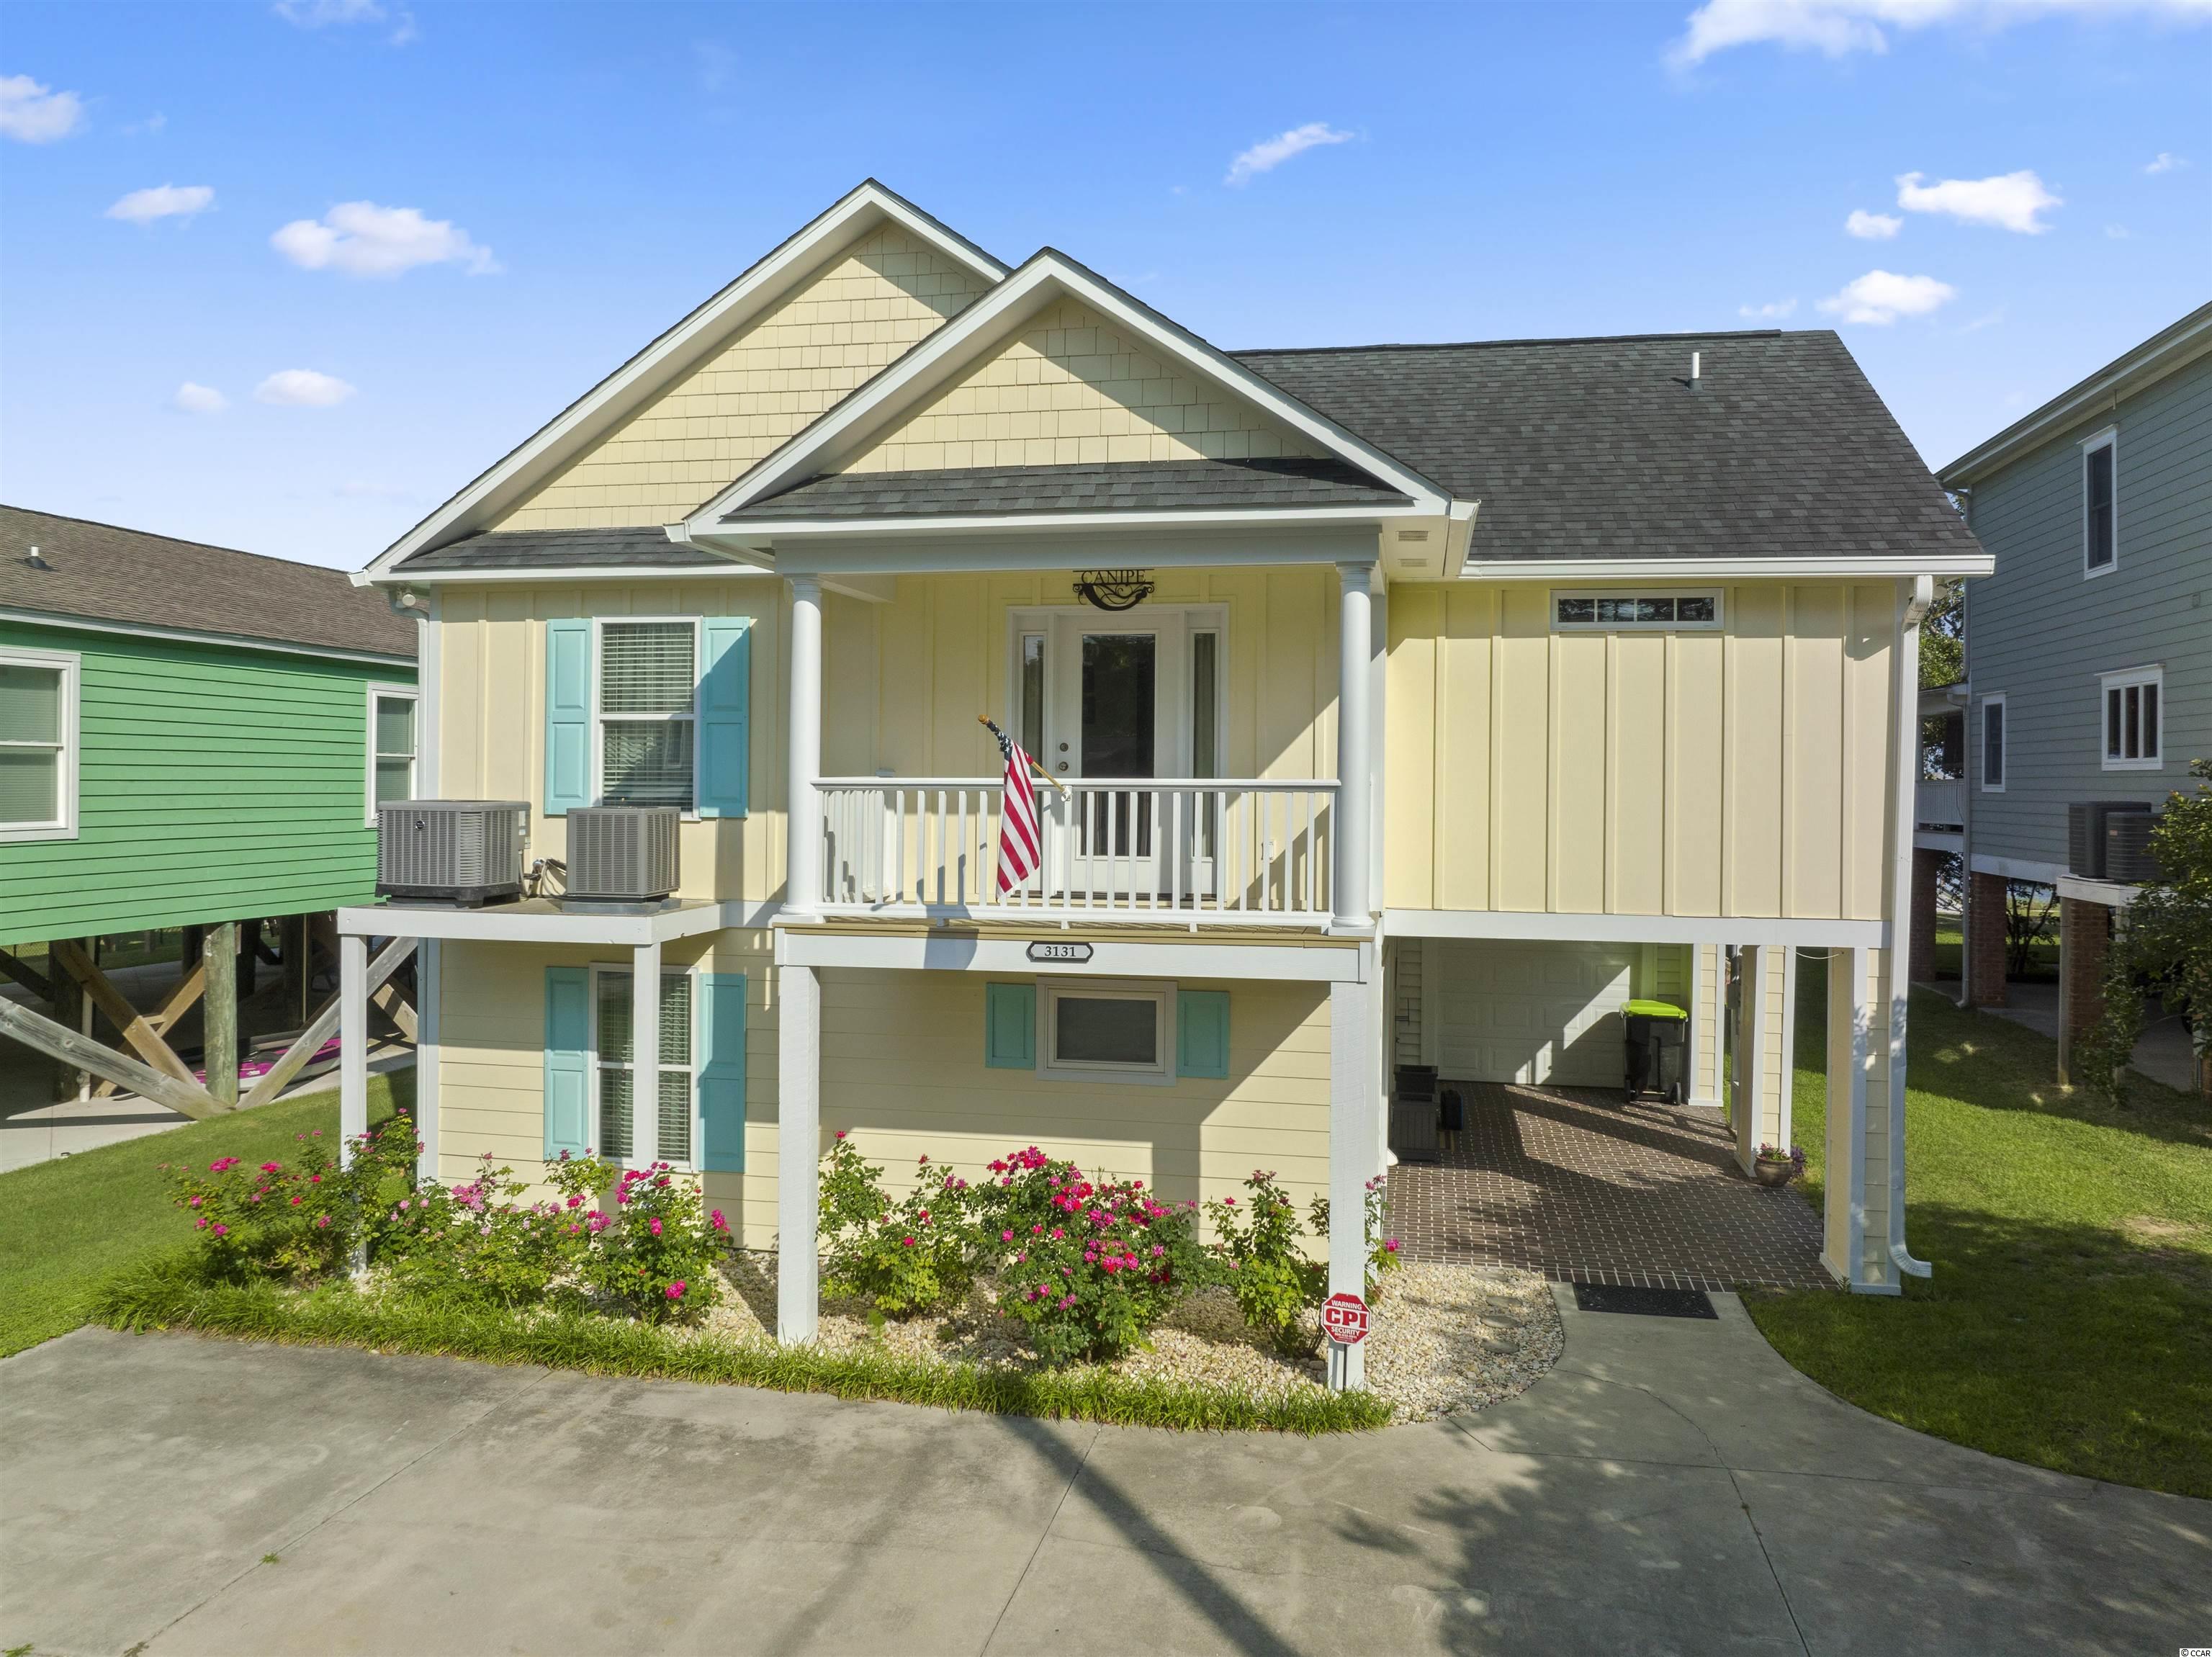 3131 1st Ave. S Murrells Inlet, SC 29576